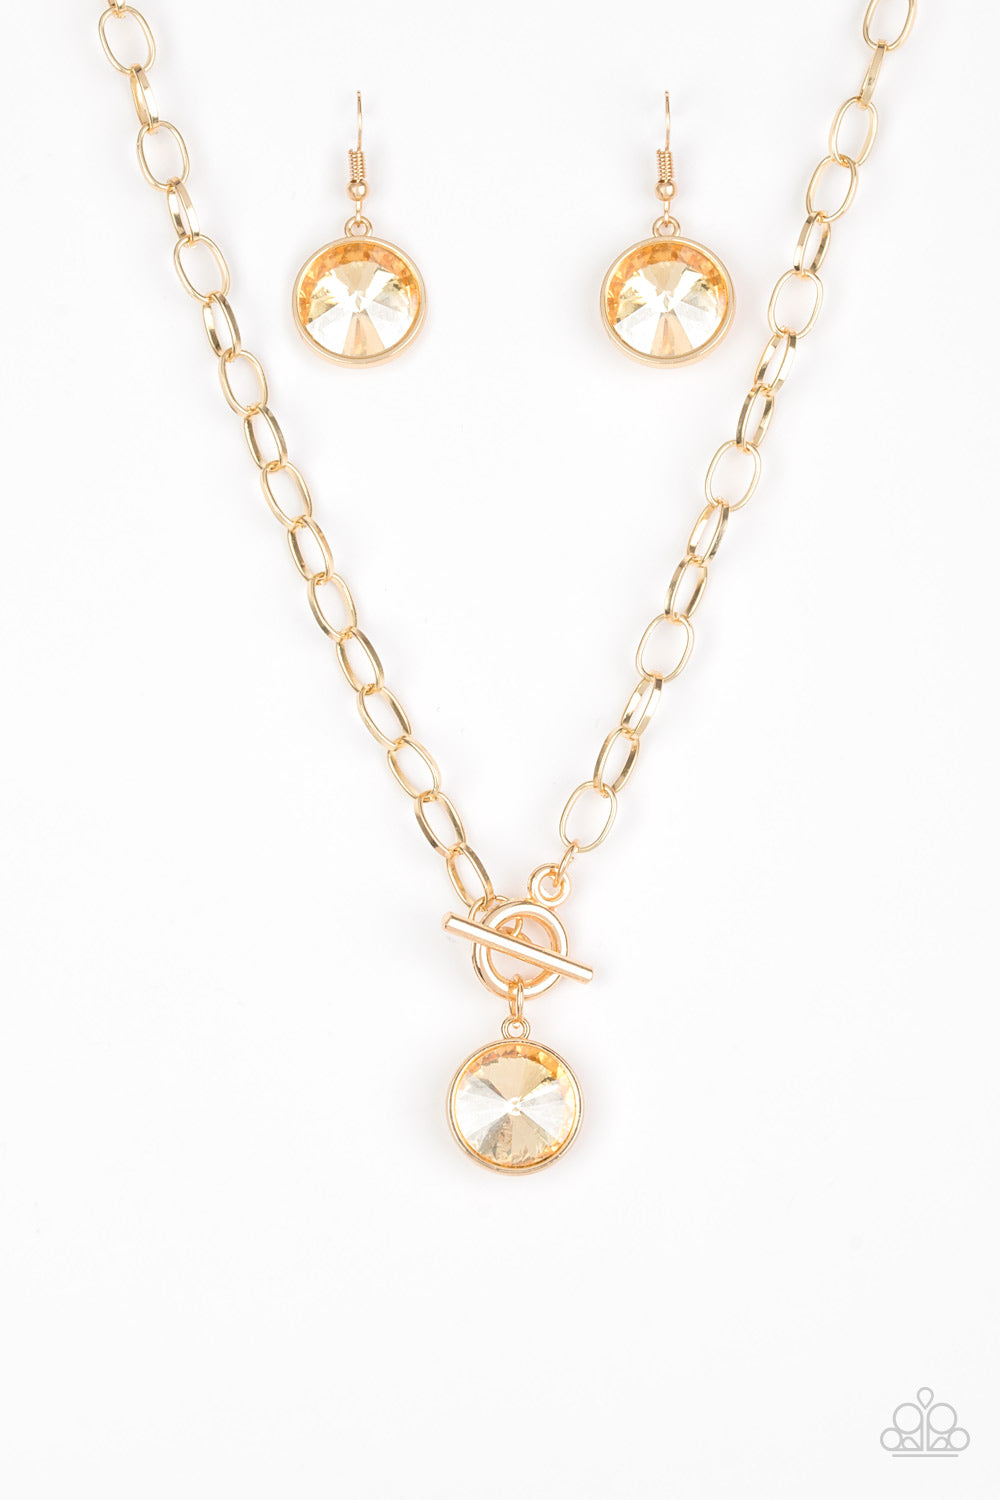 She Sparkles On Gold Necklace - Paparazzi Accessories